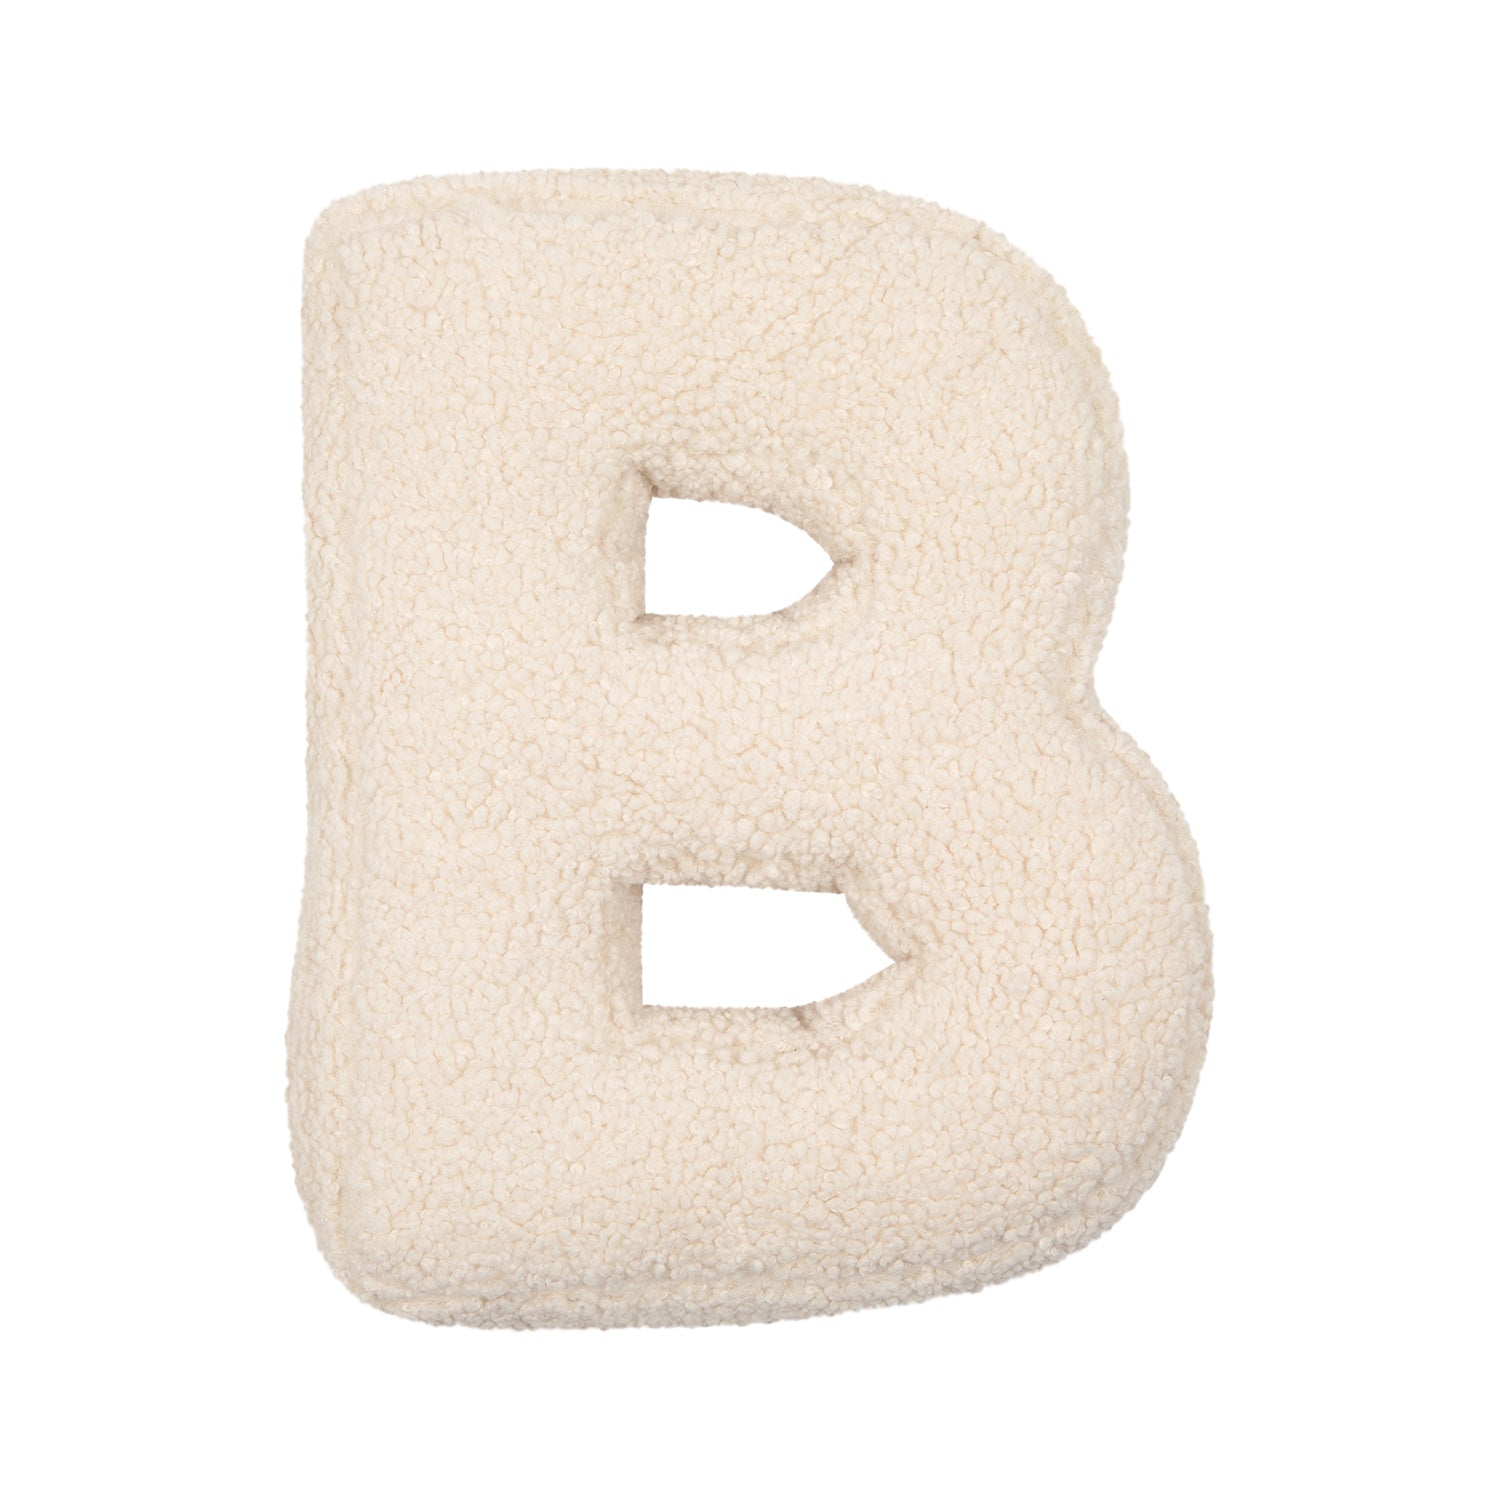 Boucle Letter cushion B by Bettys Home Teddy Letter Pillow on white background baby shower gift idea